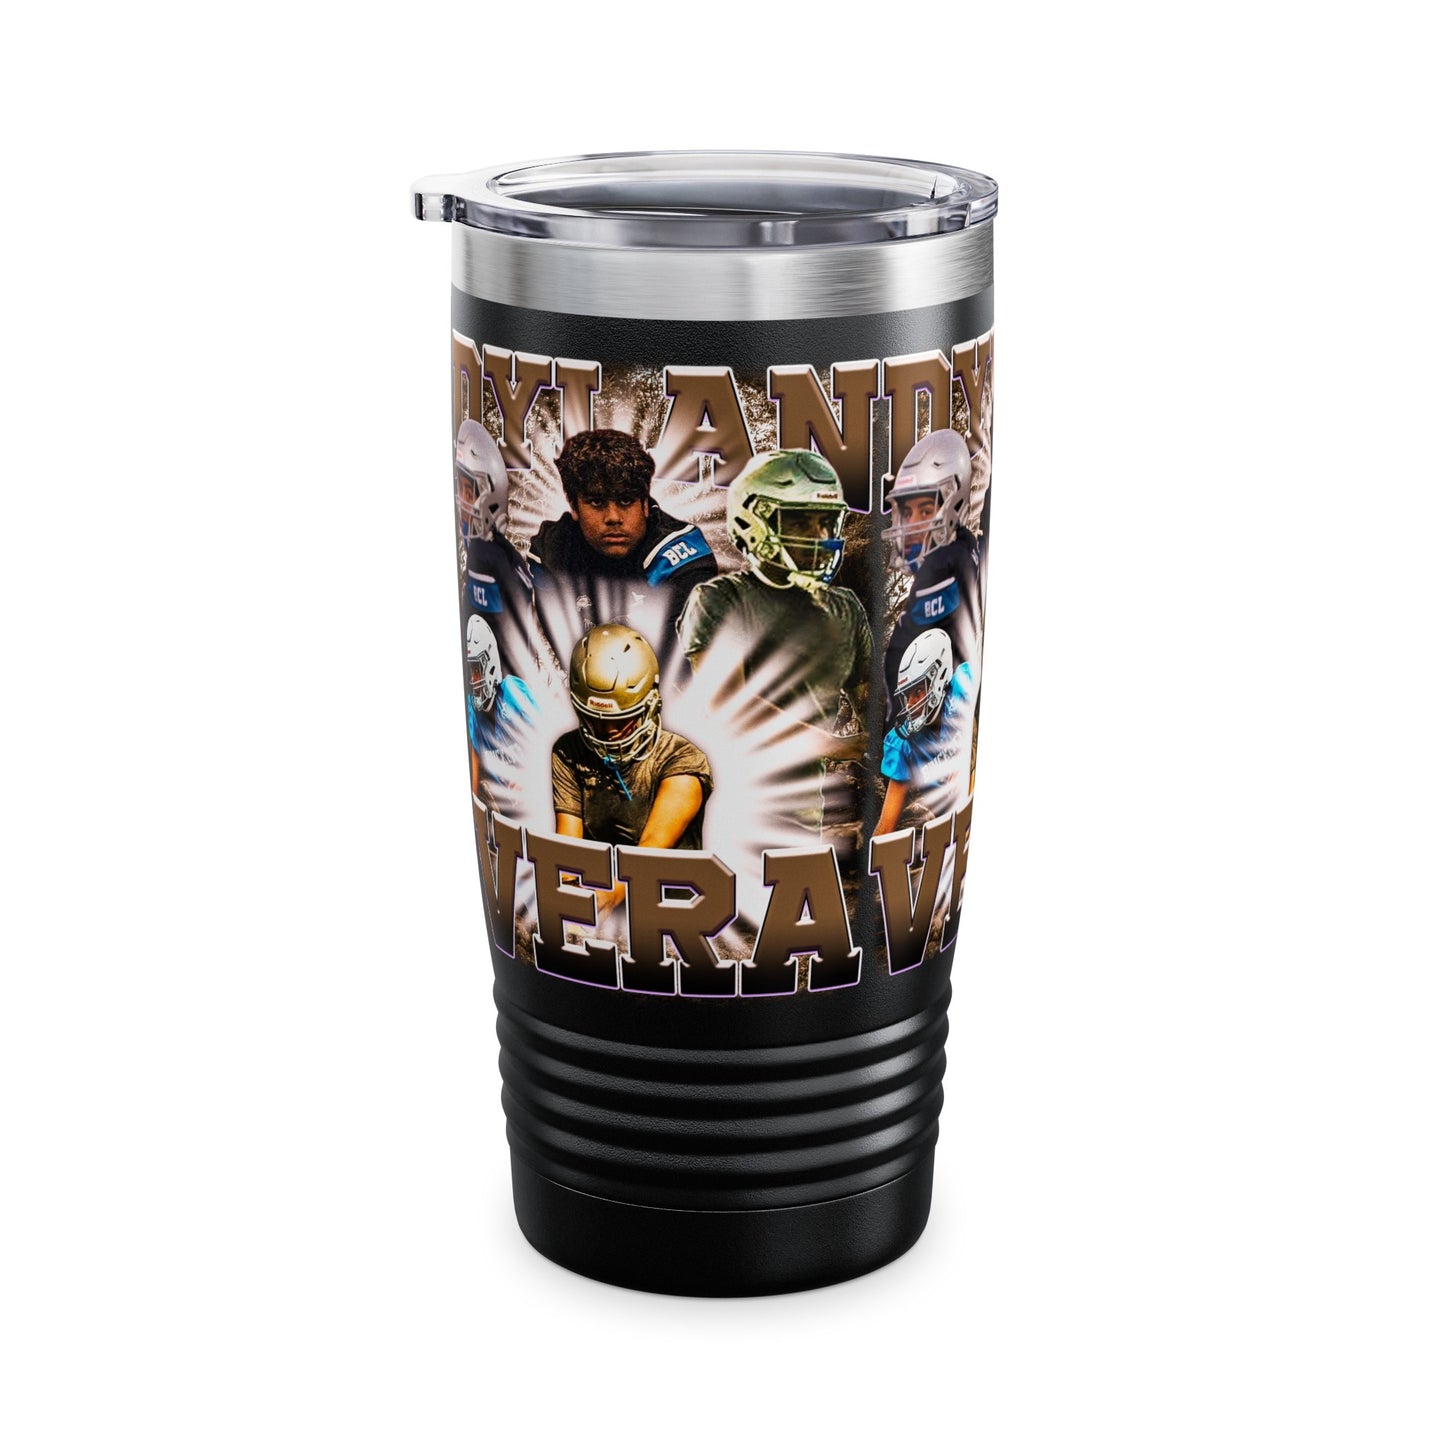 Dylan Vera Stainless Steal Tumbler